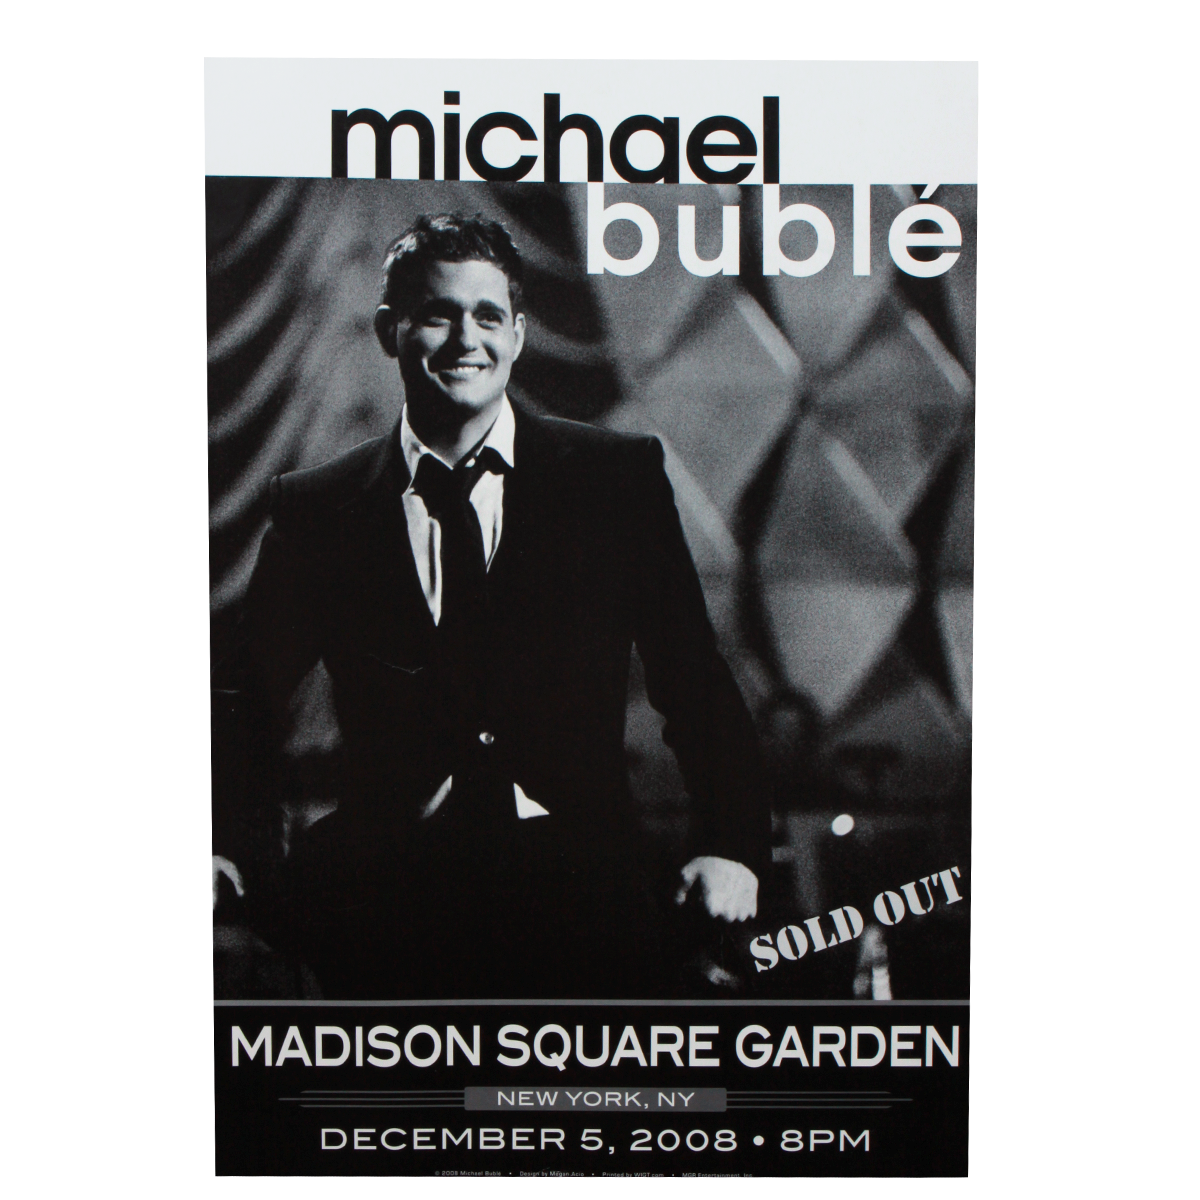 Official Store of Madison Square Garden